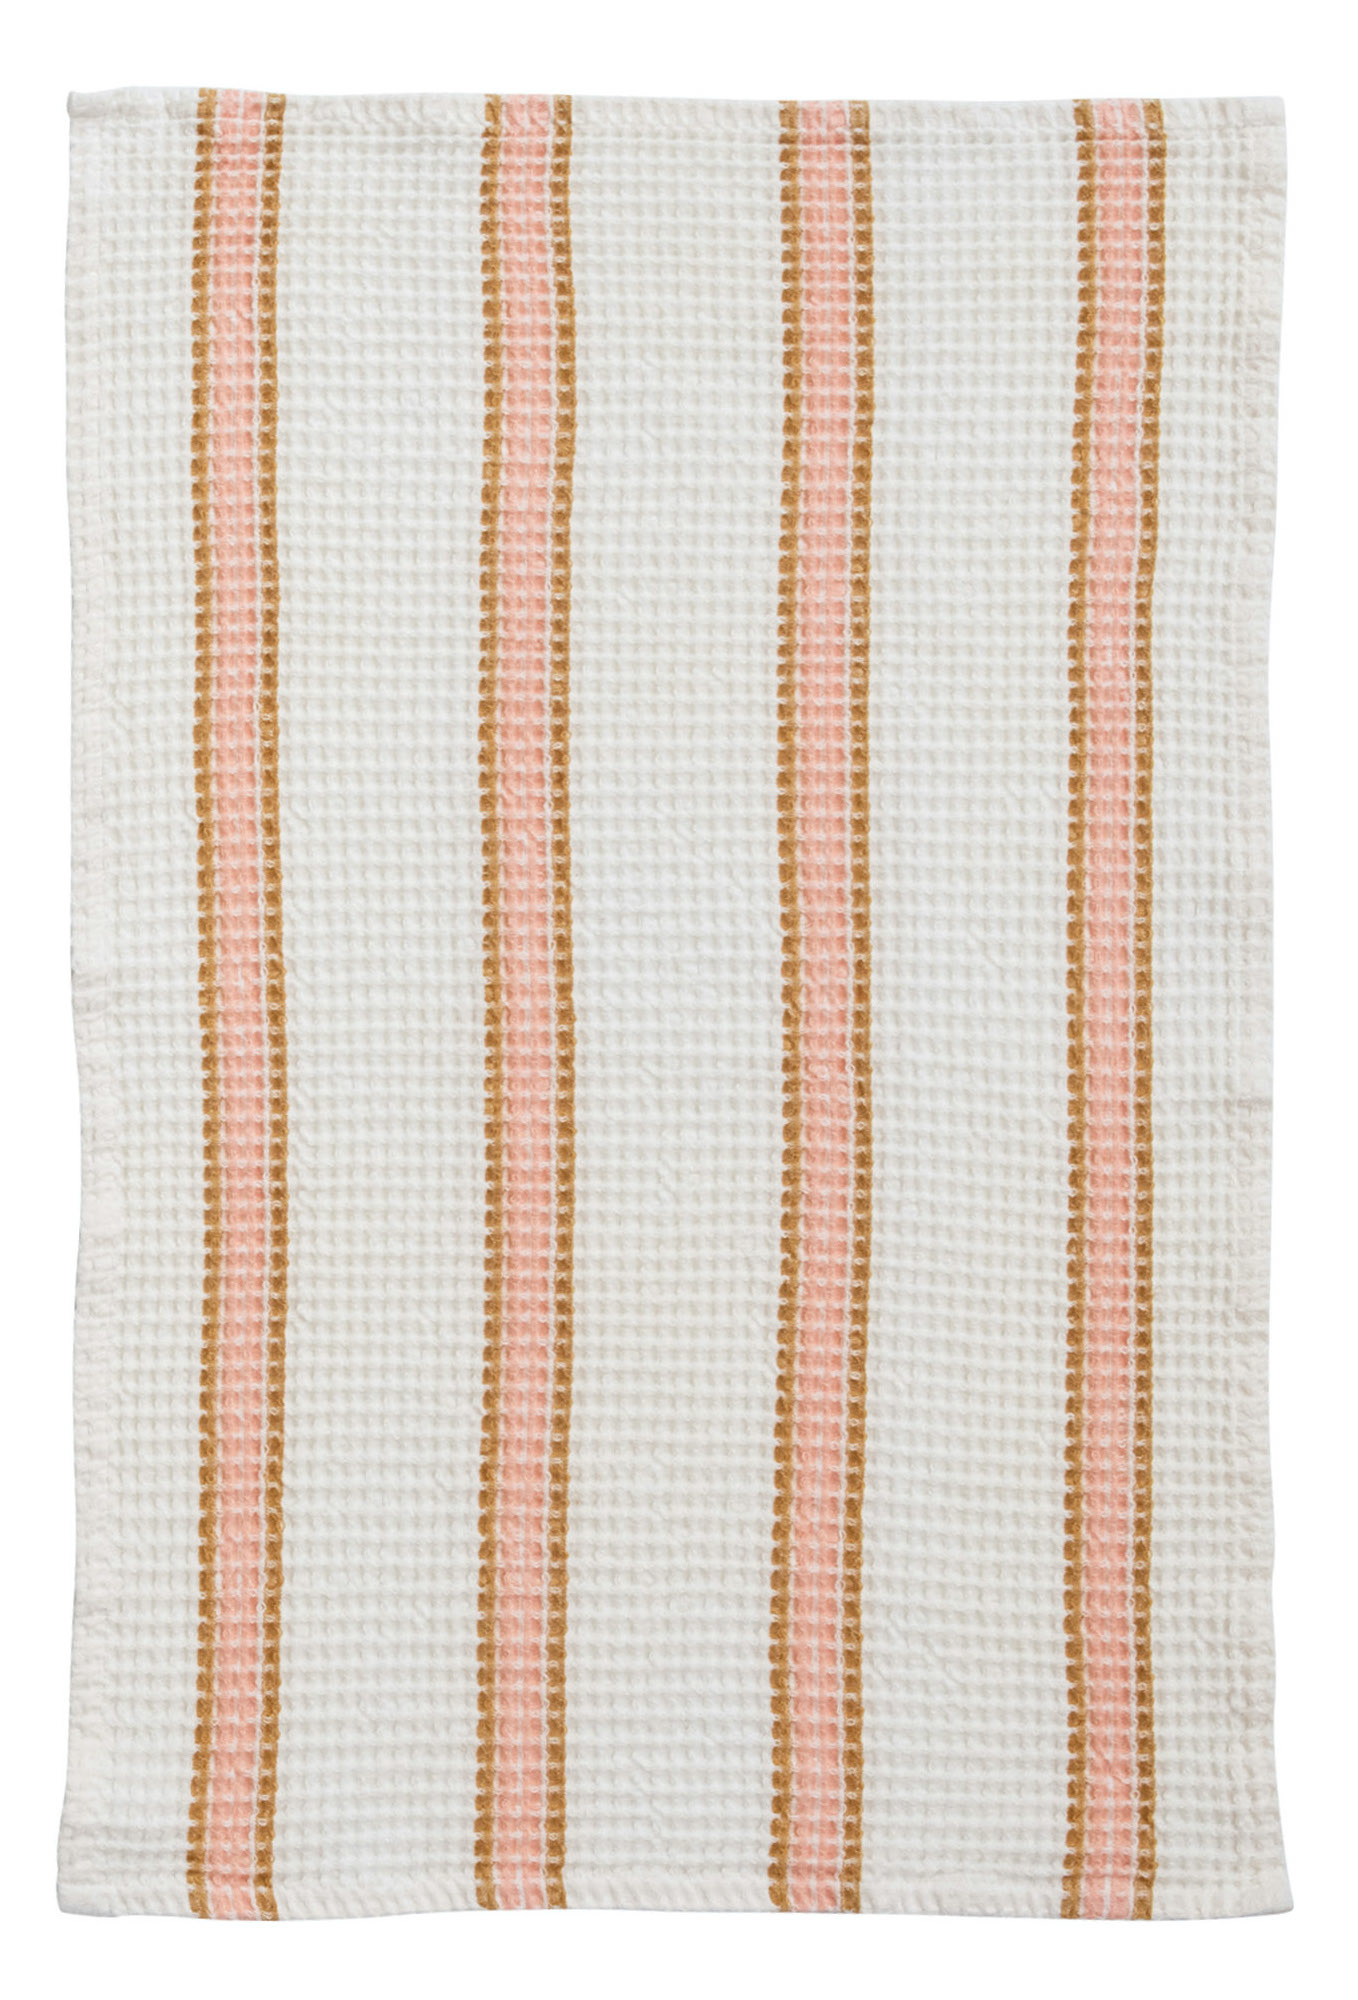 available at m. lynne designs Coral & Mustard Textured Tea Towel